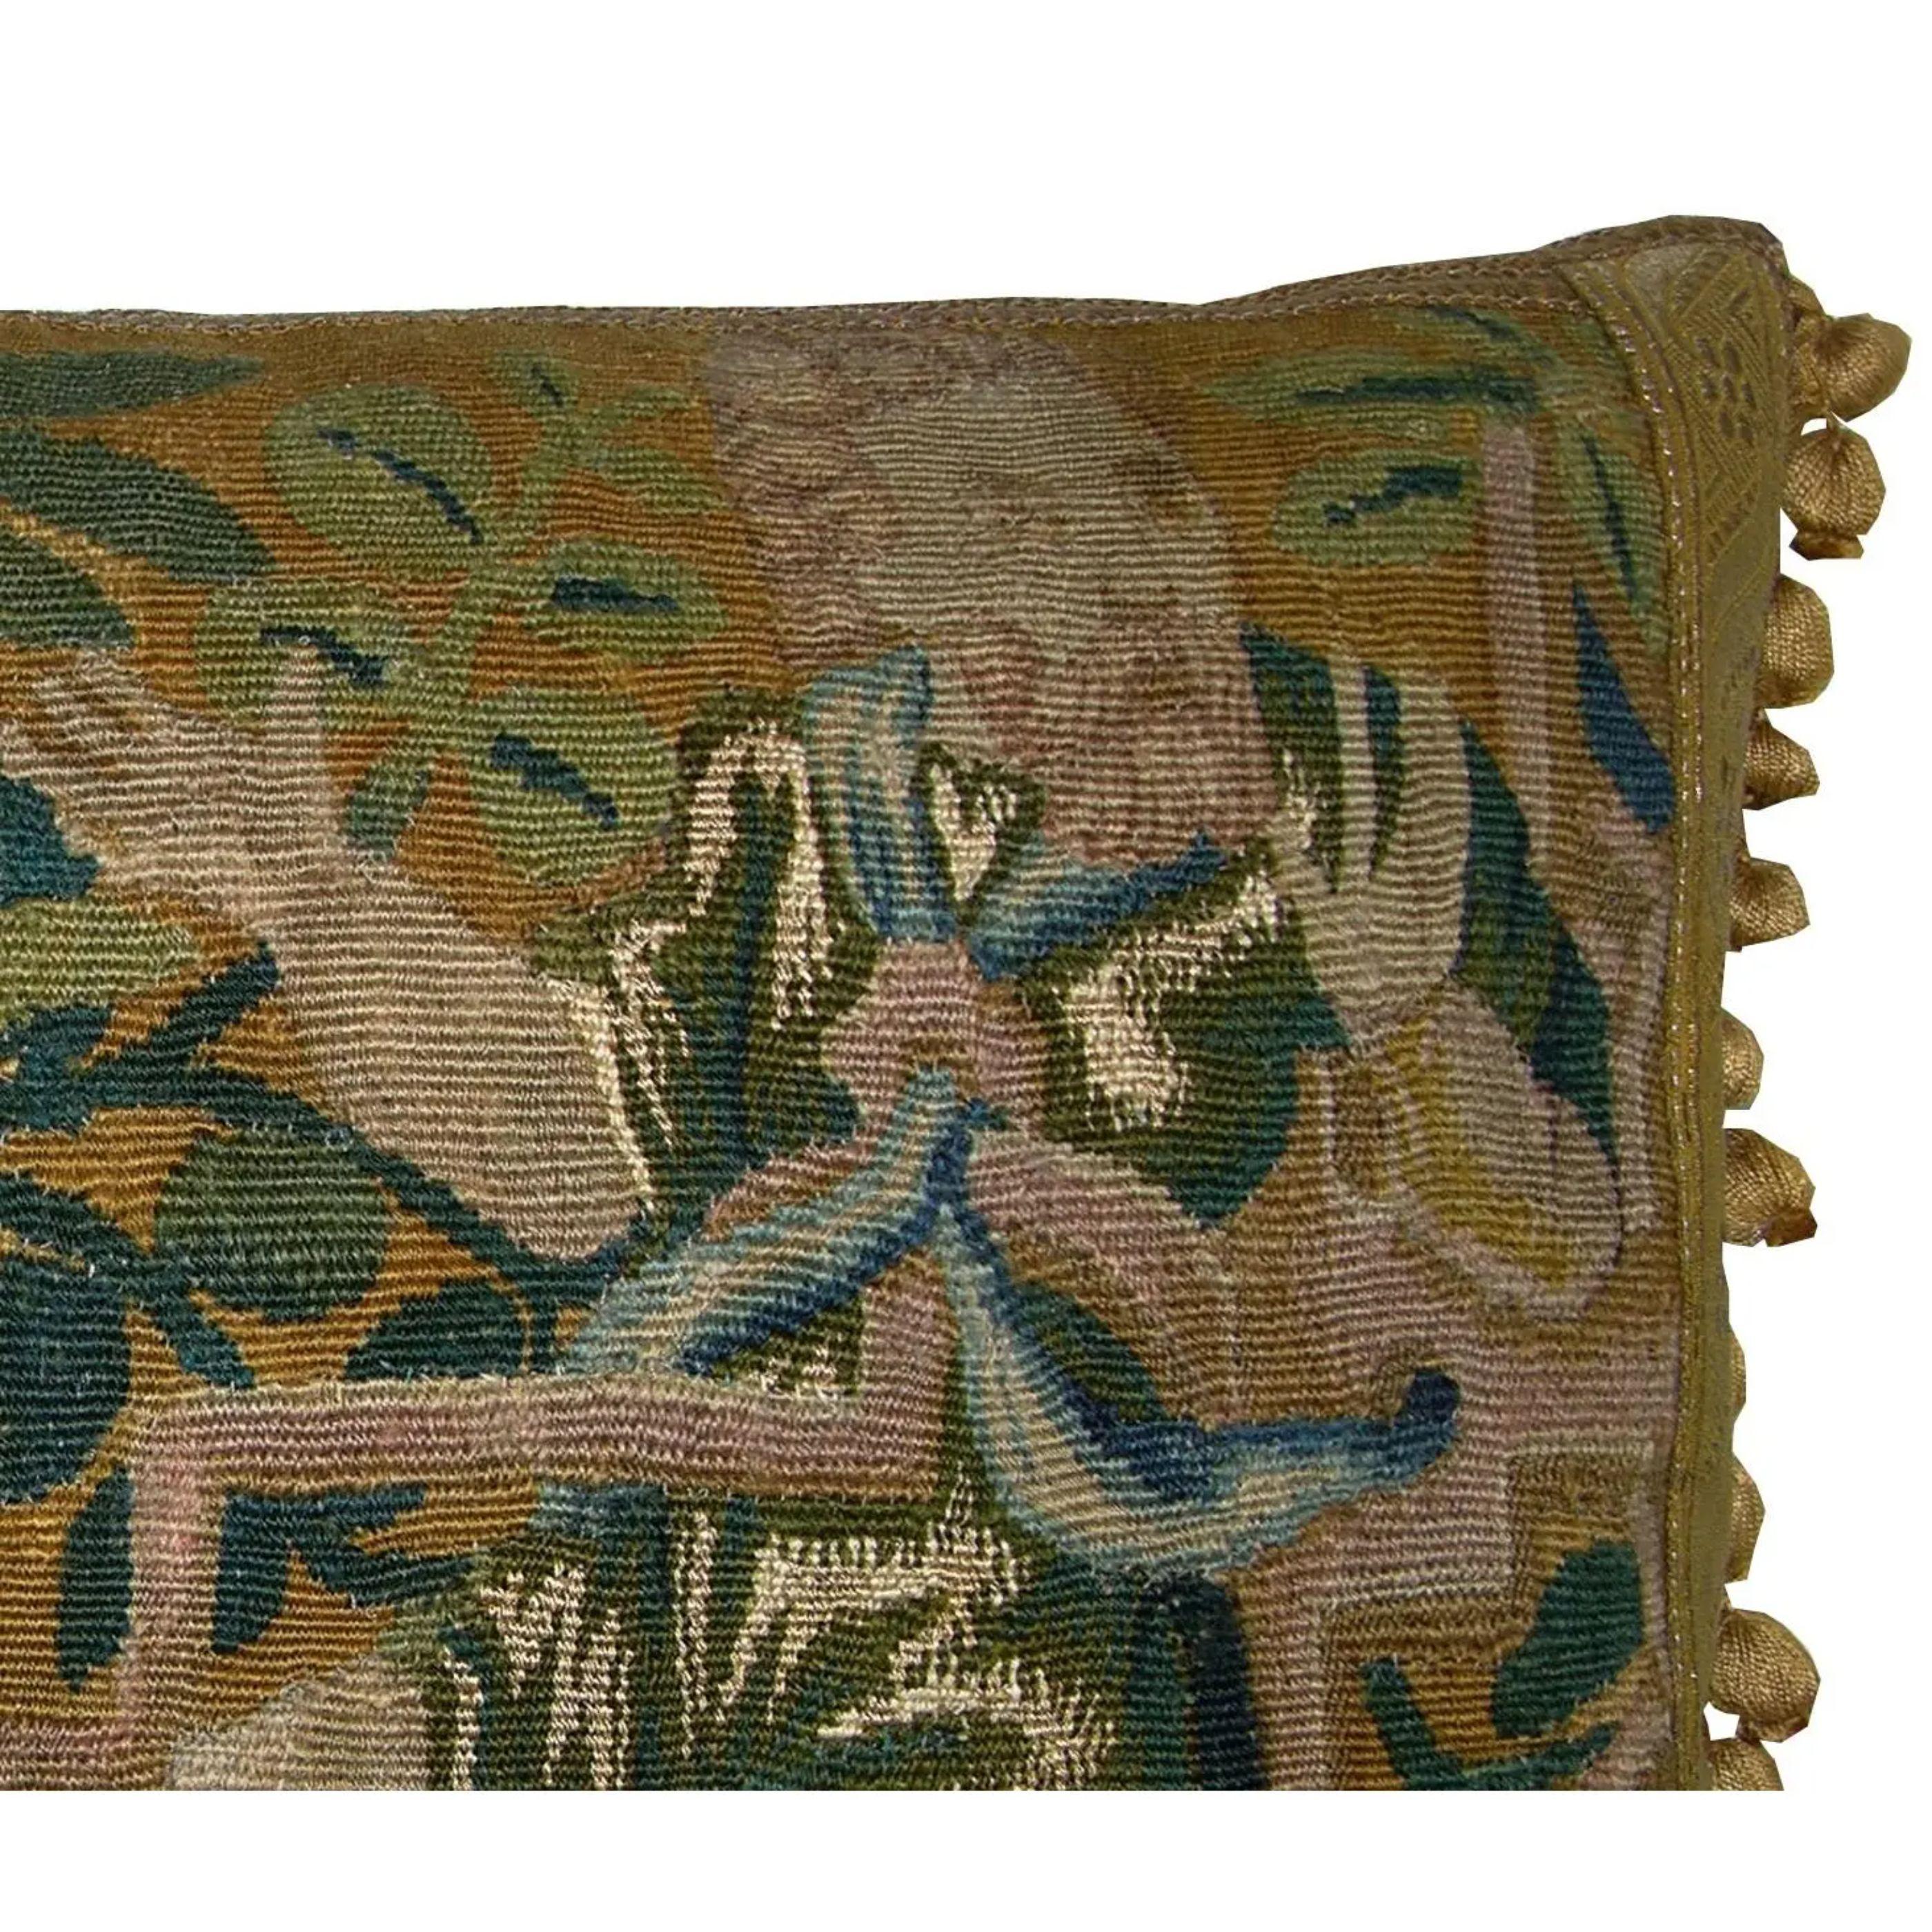 Antique Flemish Tapestry Pillow 17th Century 25'' X 15'', Handmade and Needlework, Tribal and Traditional